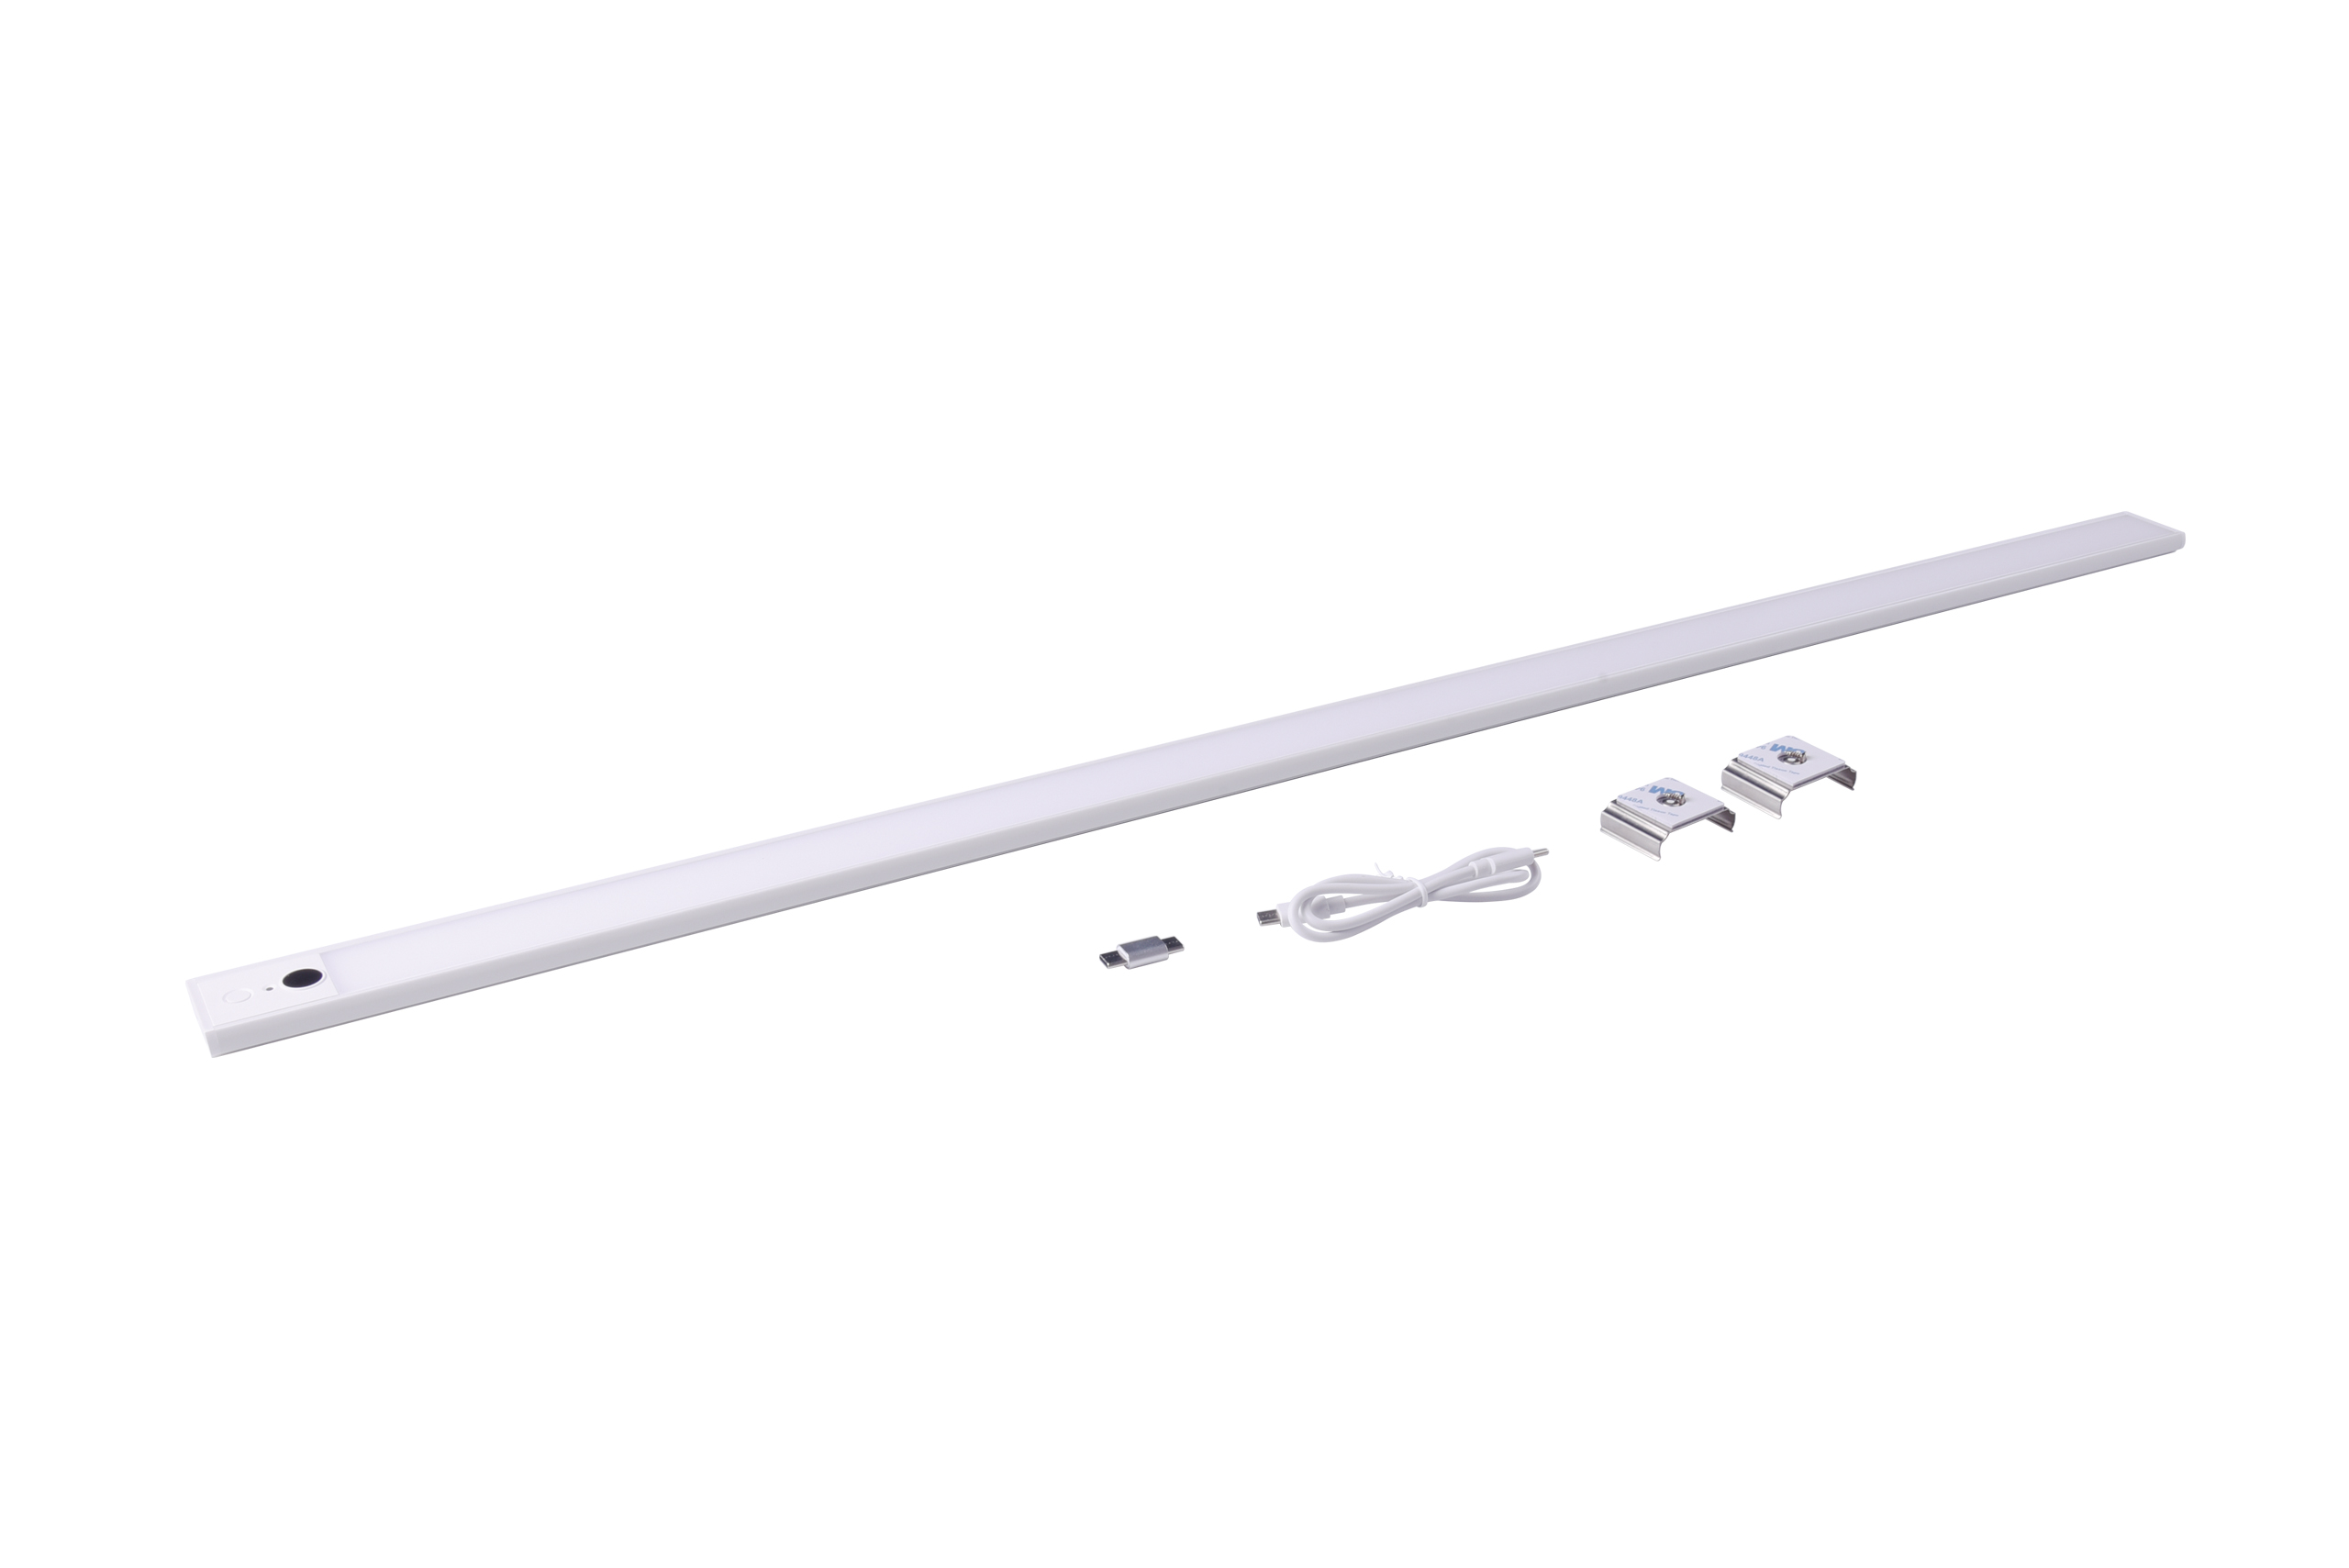 120v Under Cabinet Light For Business Is The Perfect Solution To Your Lighting Issues